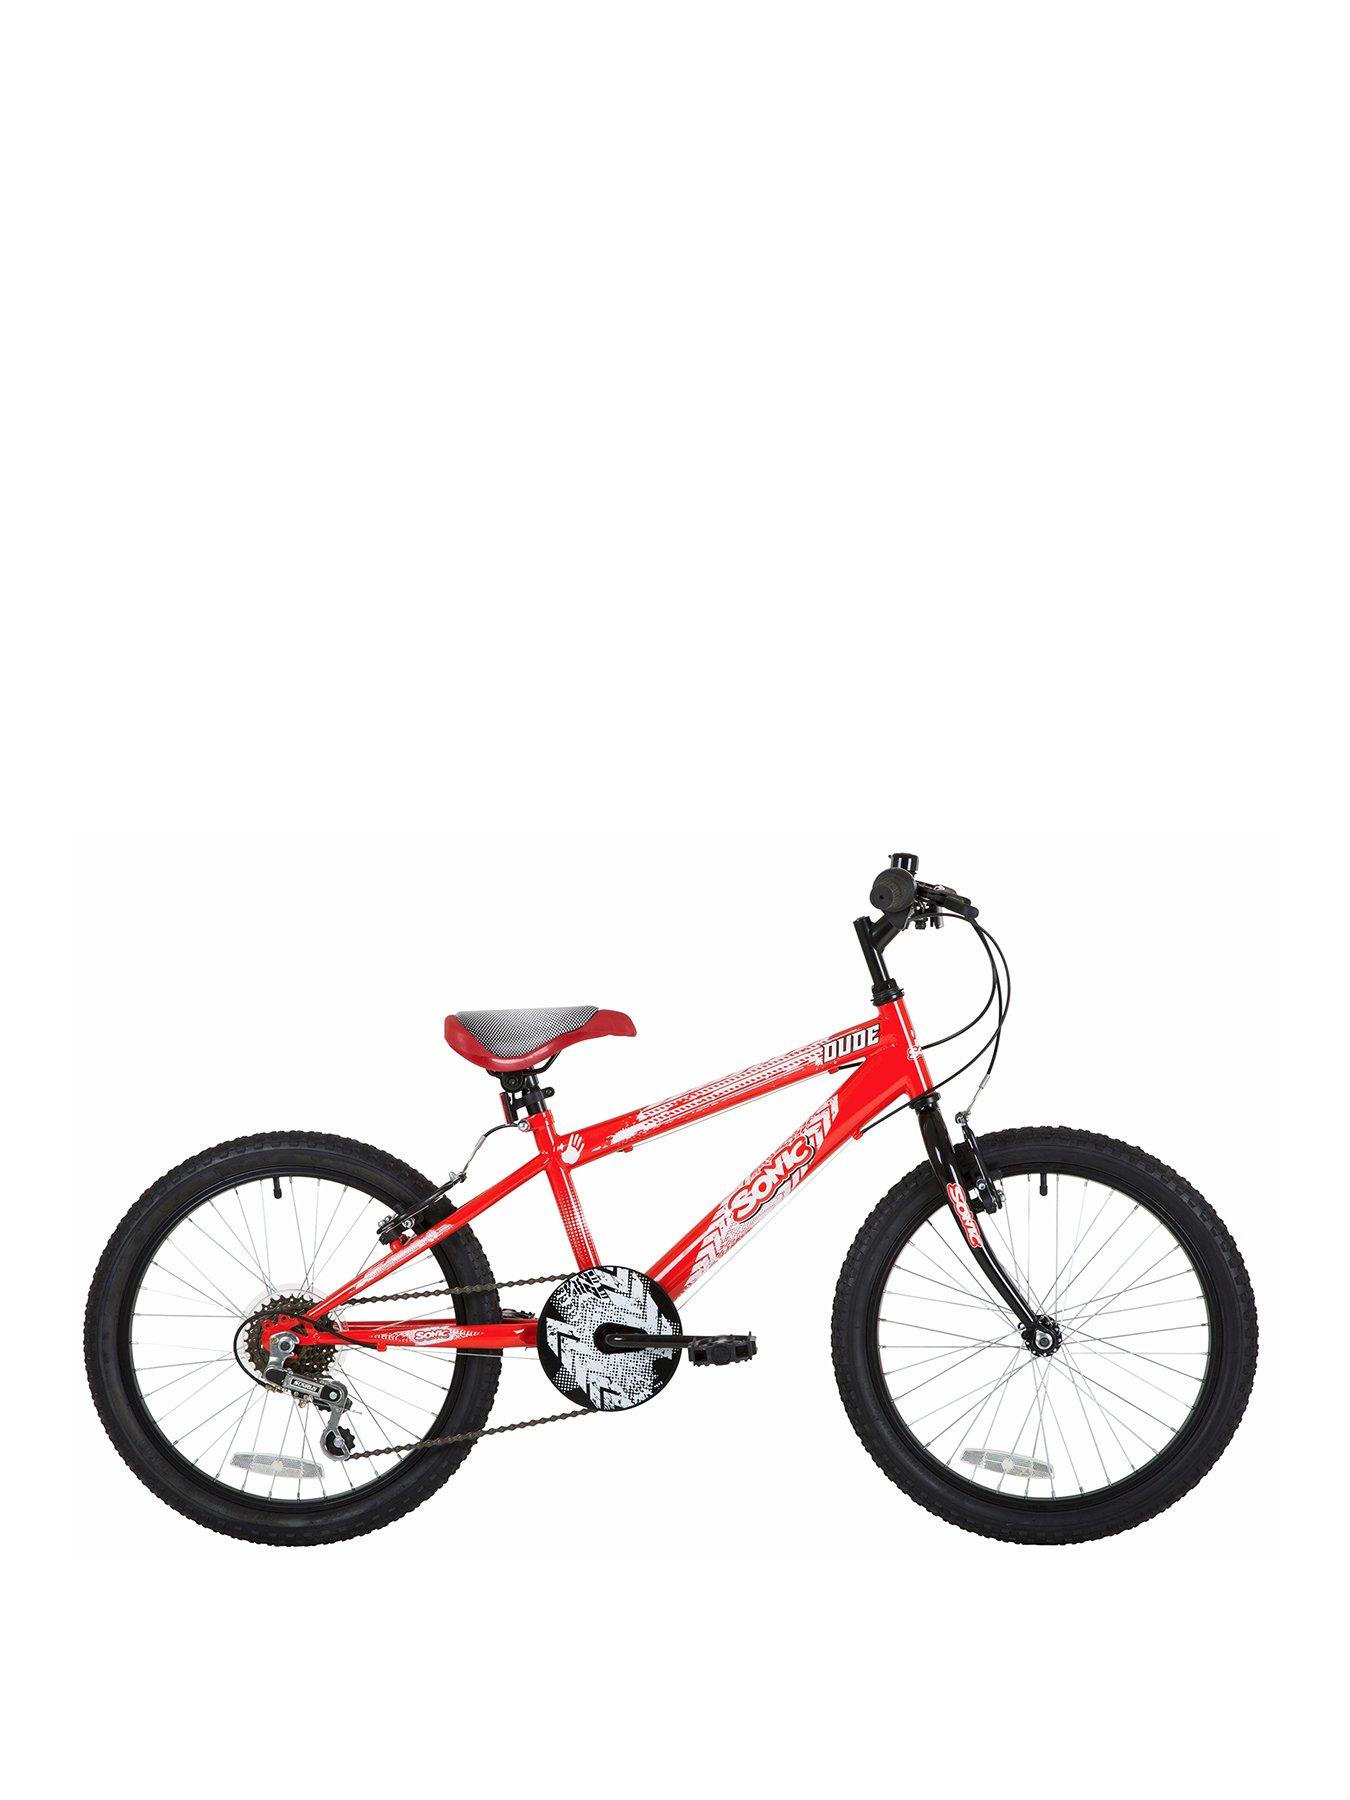 Details about   BMX BIKE Kids Boys Bicycle 20" Wheels Silver Red Steel Frame 